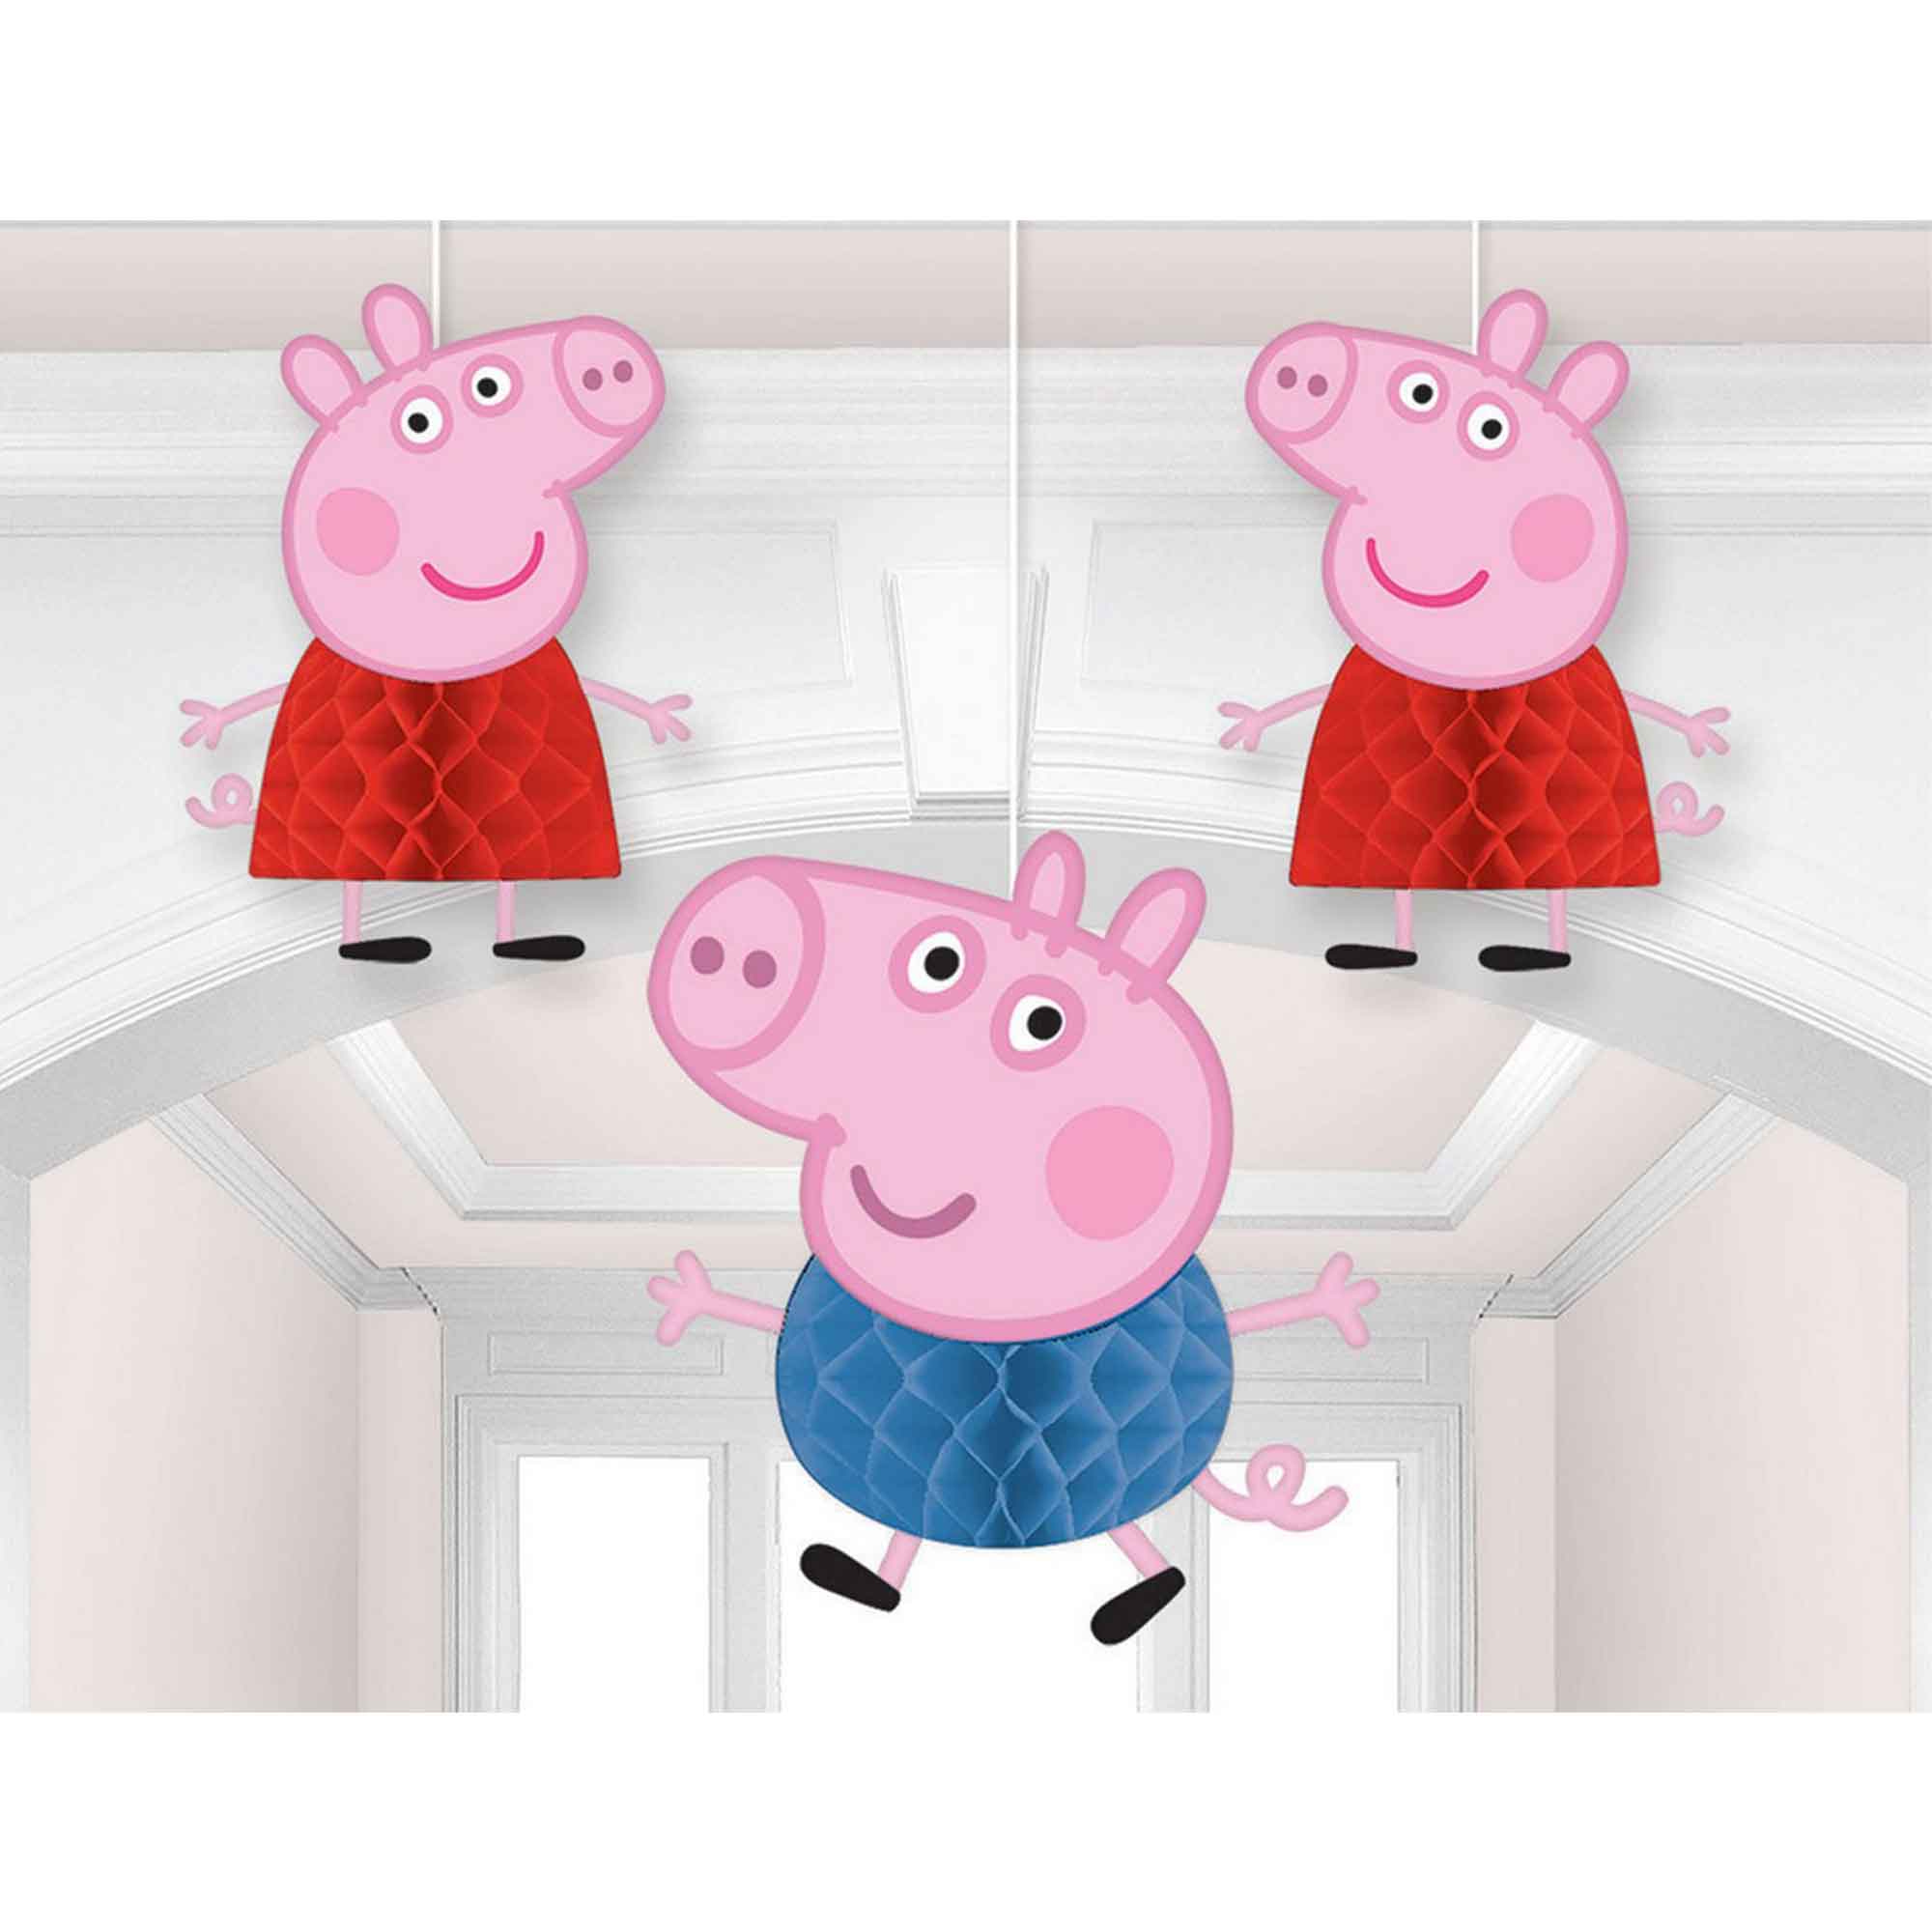 Peppa Pig Honeycomb Decorations Tissue and Printed Paper - 3 Pack Default Title